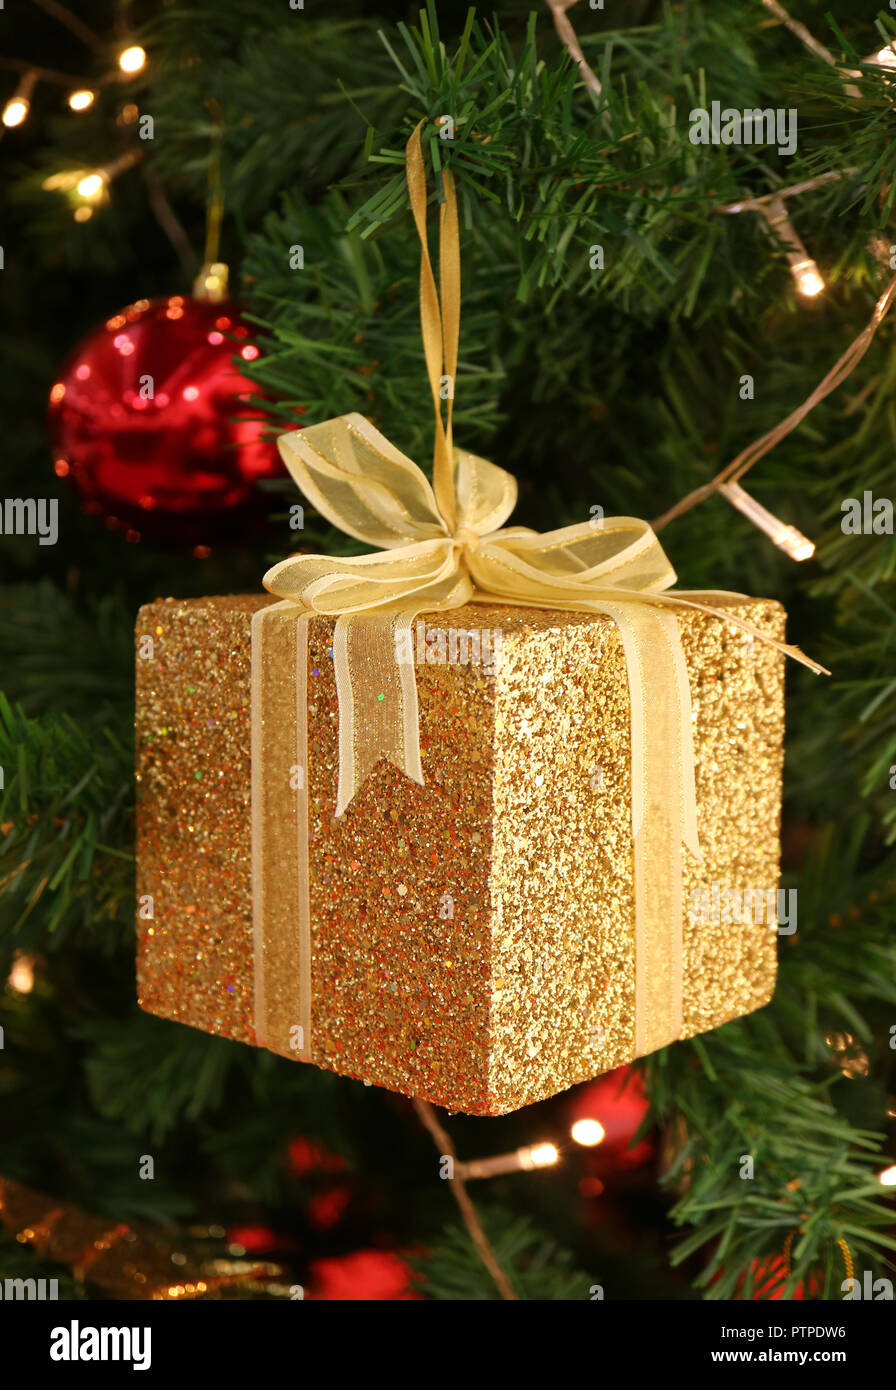 Vertical Photo of Gold Glitter Square Gift Box with Shiny Ribbon Bow Ornament for Christmas Decoration Stock Photo